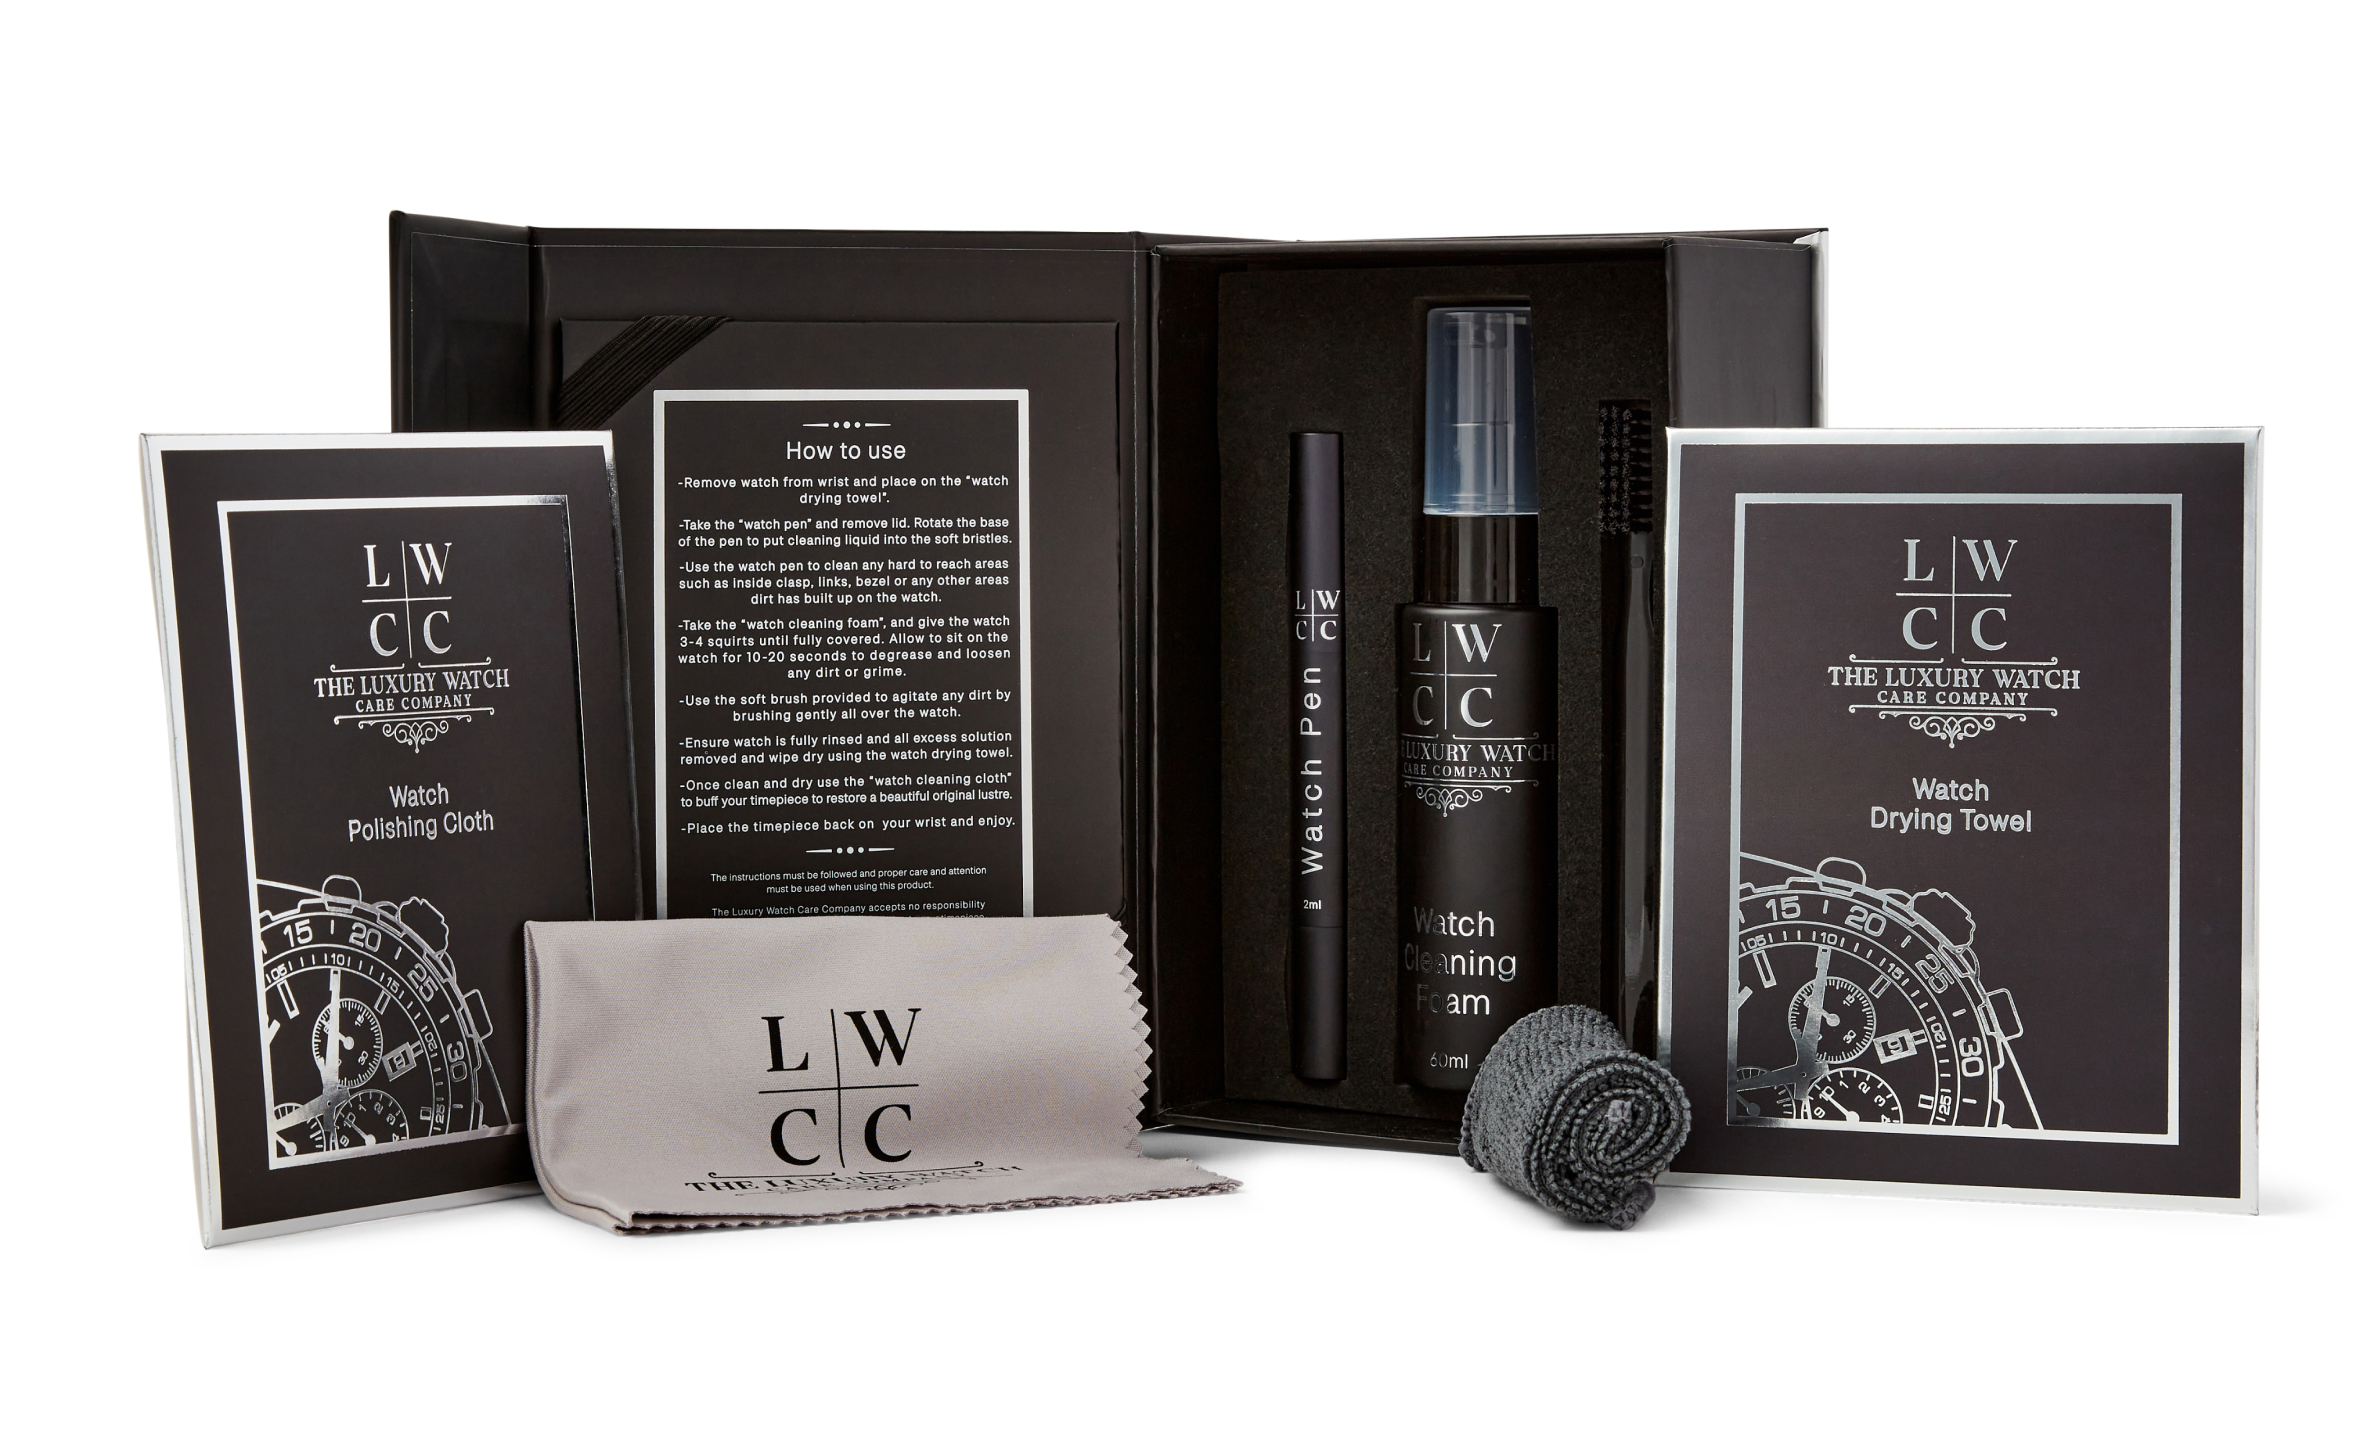 Watch Cleaning Kit – The Luxury Watch Care Company